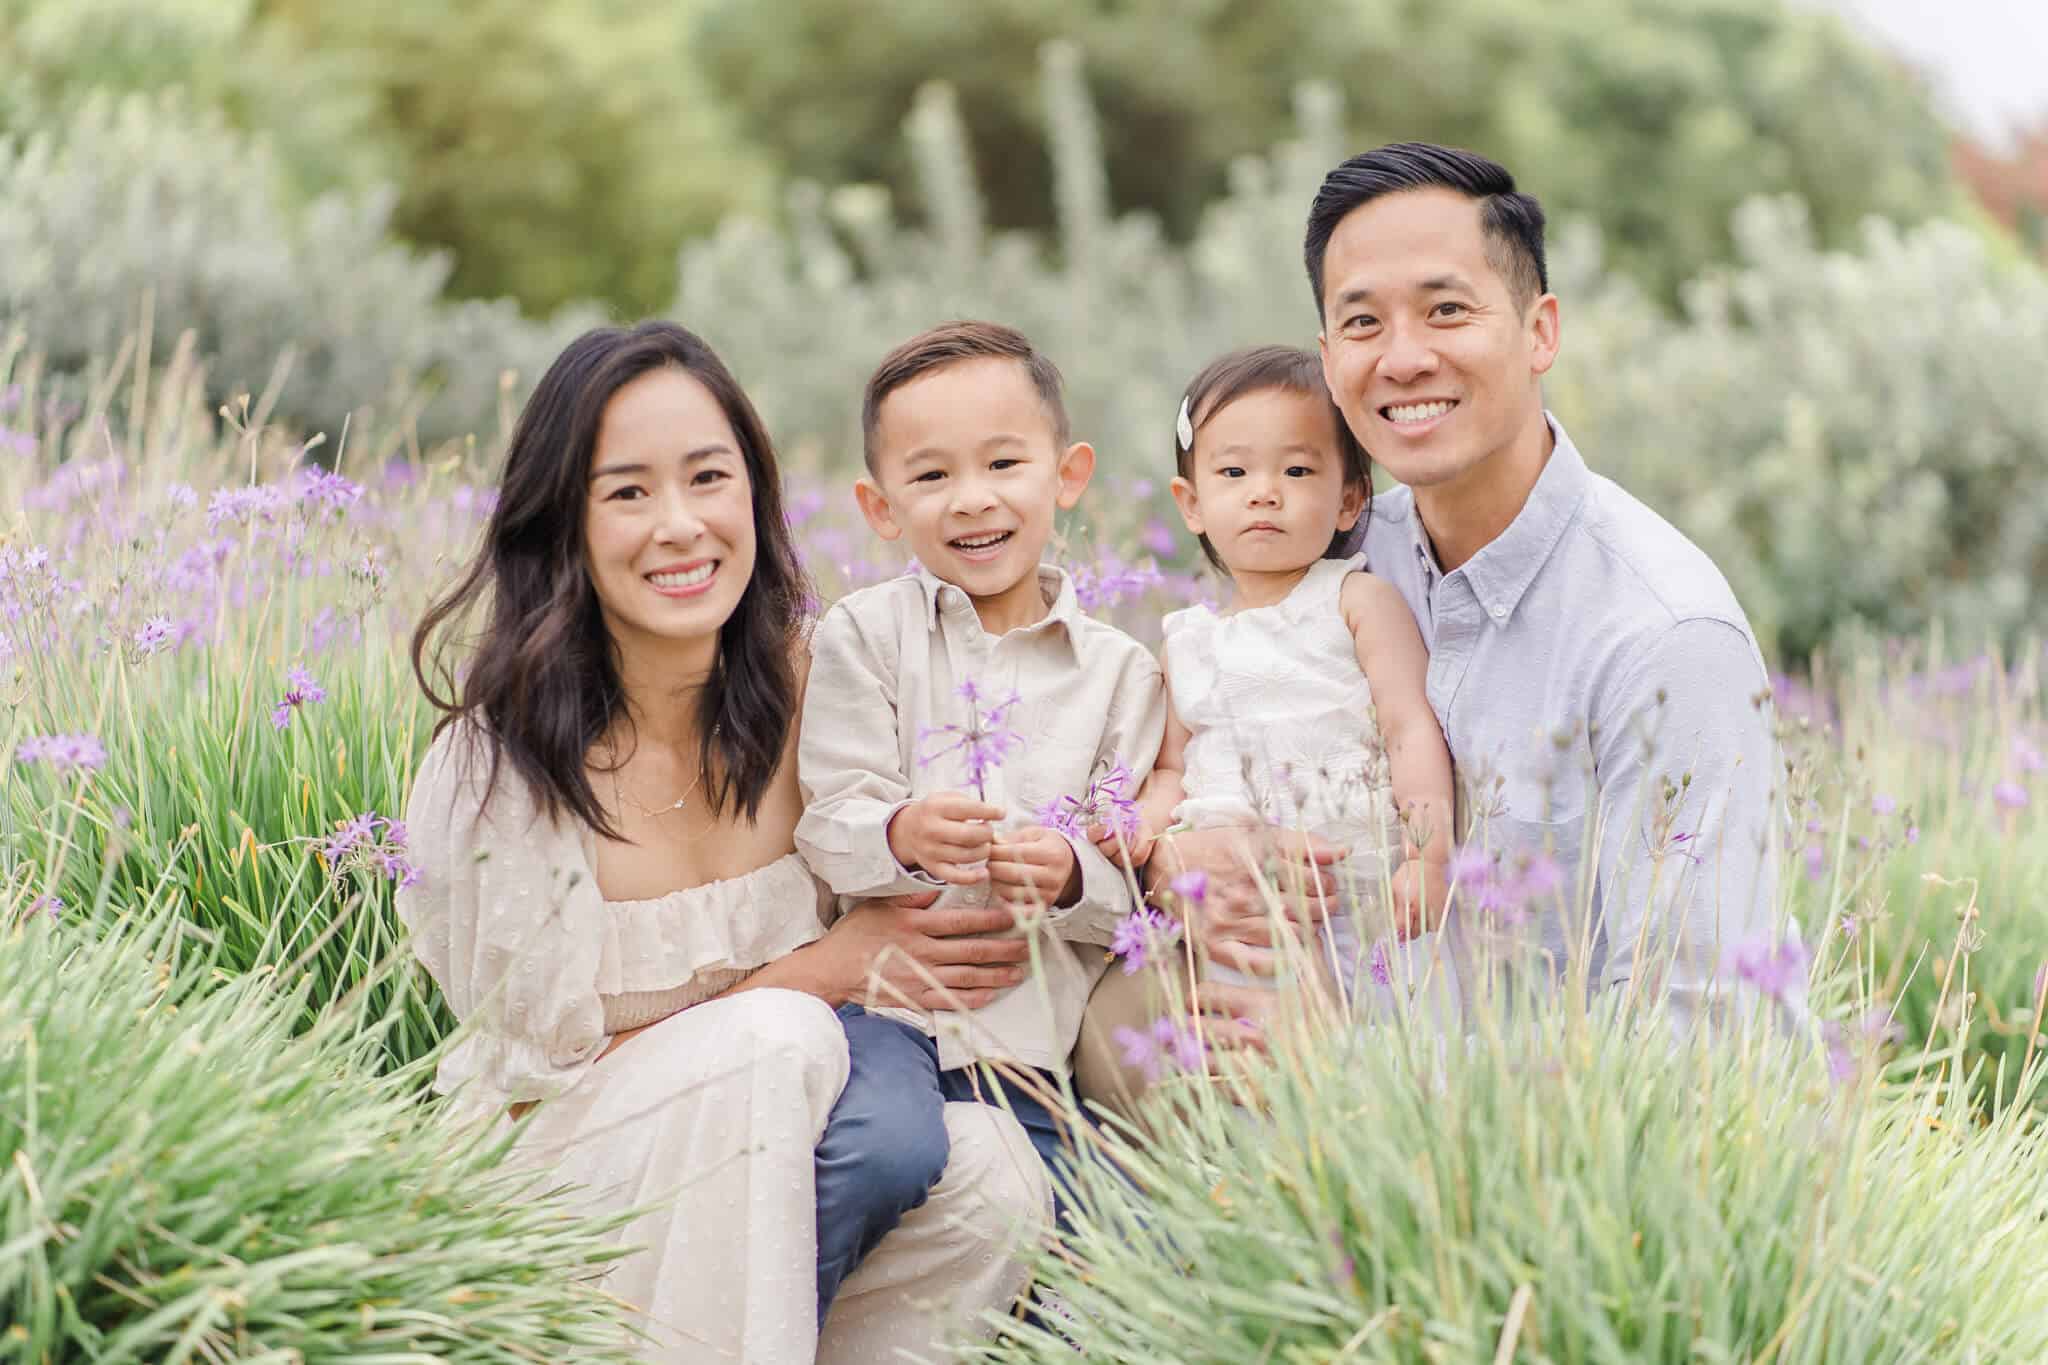 Asian mom and dad holding toddler son and daugher in their arms while squatting in between some bushes/grass